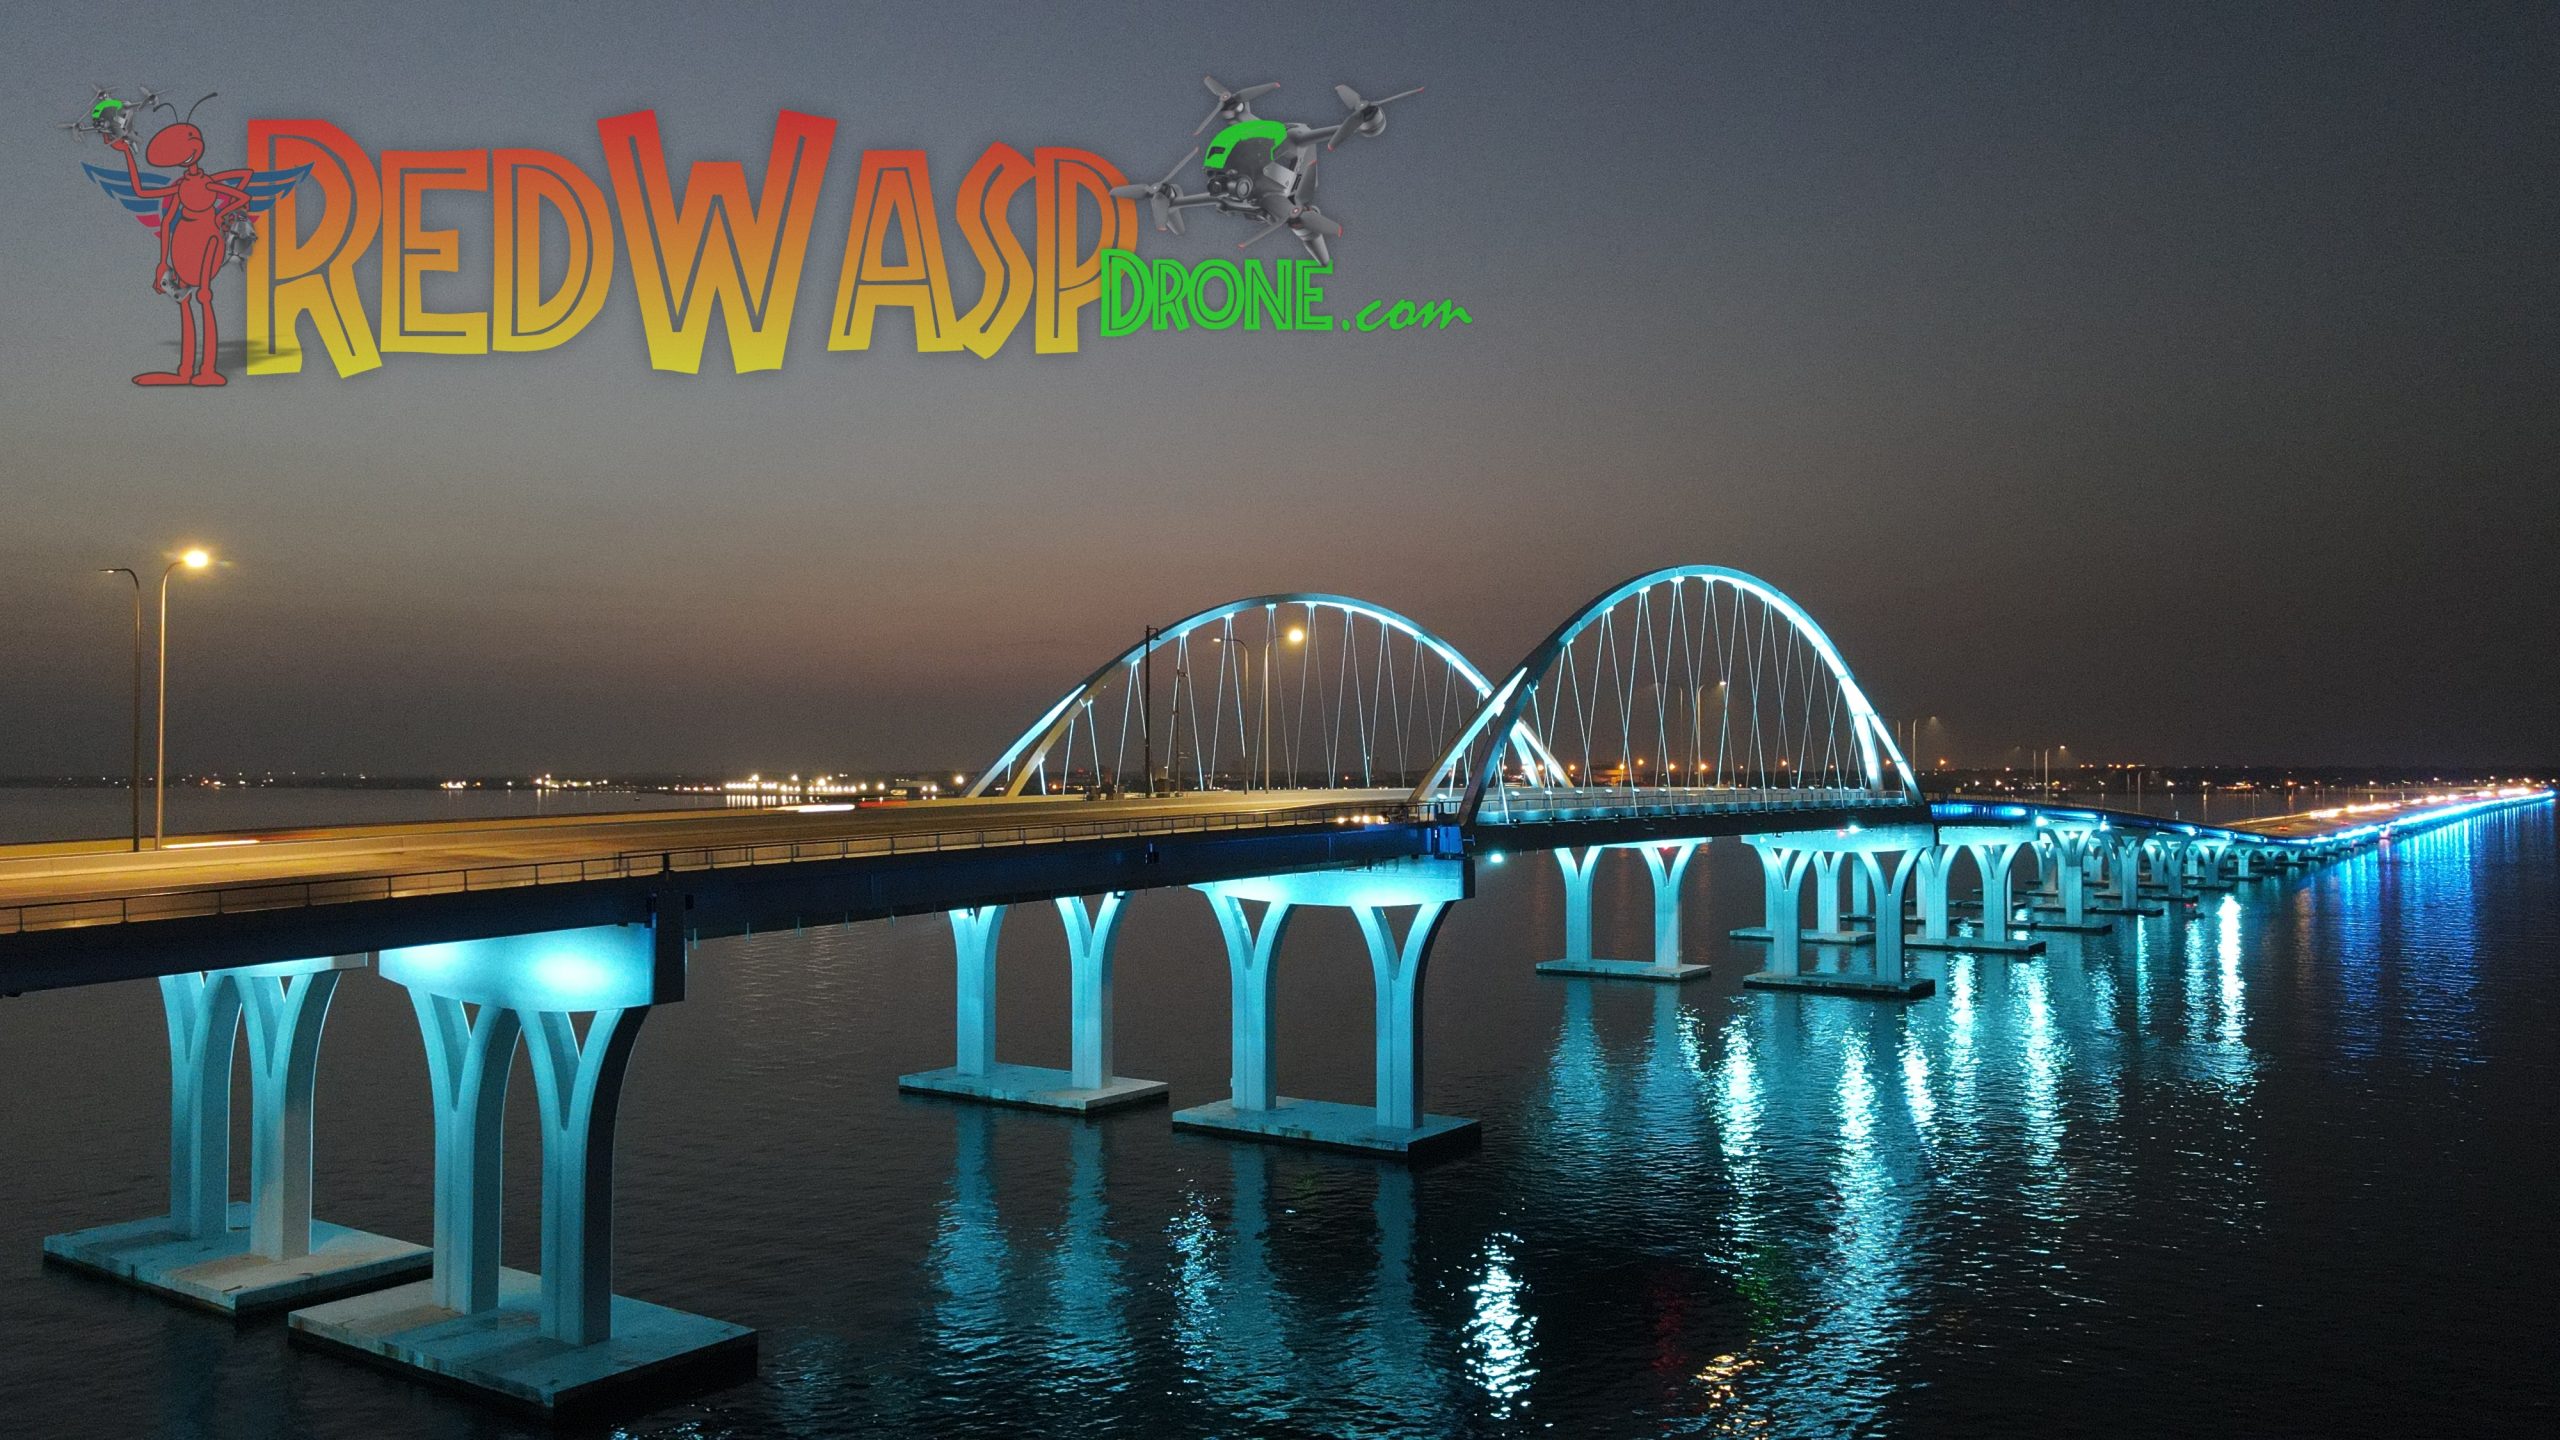 Pensacola bridge lights, night photography, stunning architecture, aerial view, Gulf Breeze-Pensacola region, mesmerizing spectacle, vibrant illumination, architectural masterpiece, captivating beauty, Red Wasp Drone,